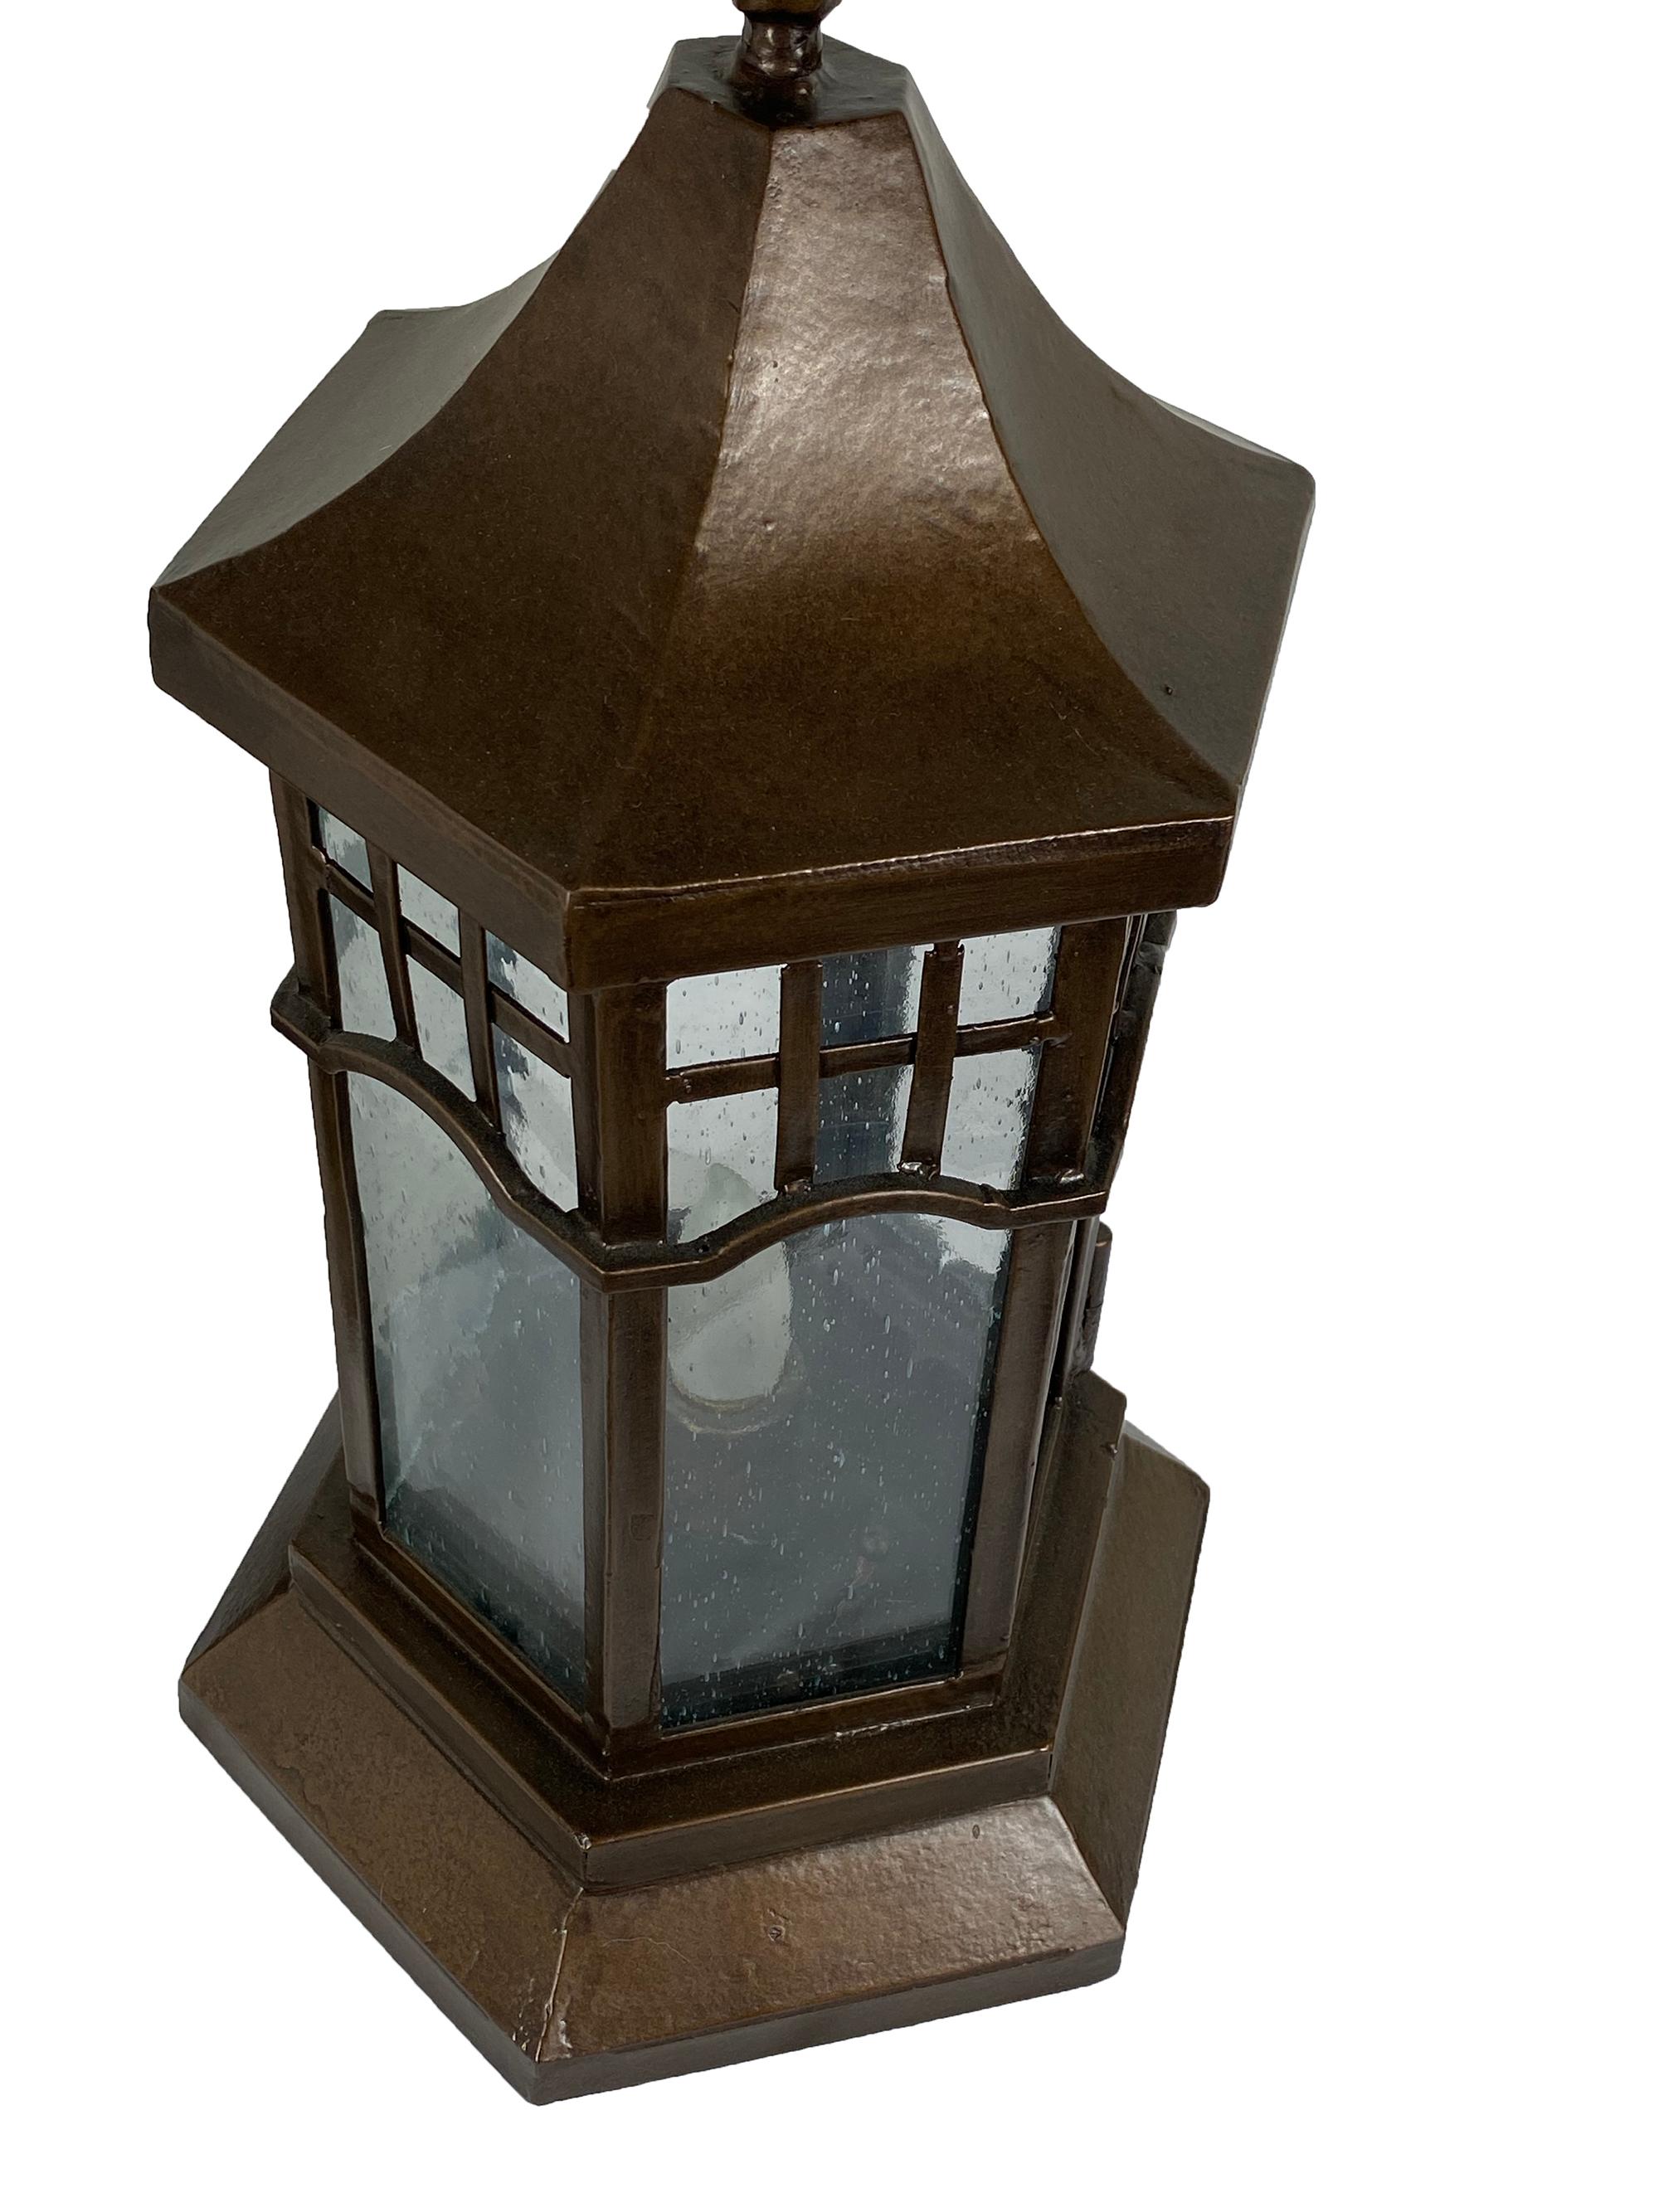 The Garden Street Pier Mount Lanterns were inspired by a Historic house in Santa Barbara. This house was originally built in 1895 as a Queen Ann Victorian. In 1904 it was purchased by the 2nd owner who remodeled it. The popular style was now